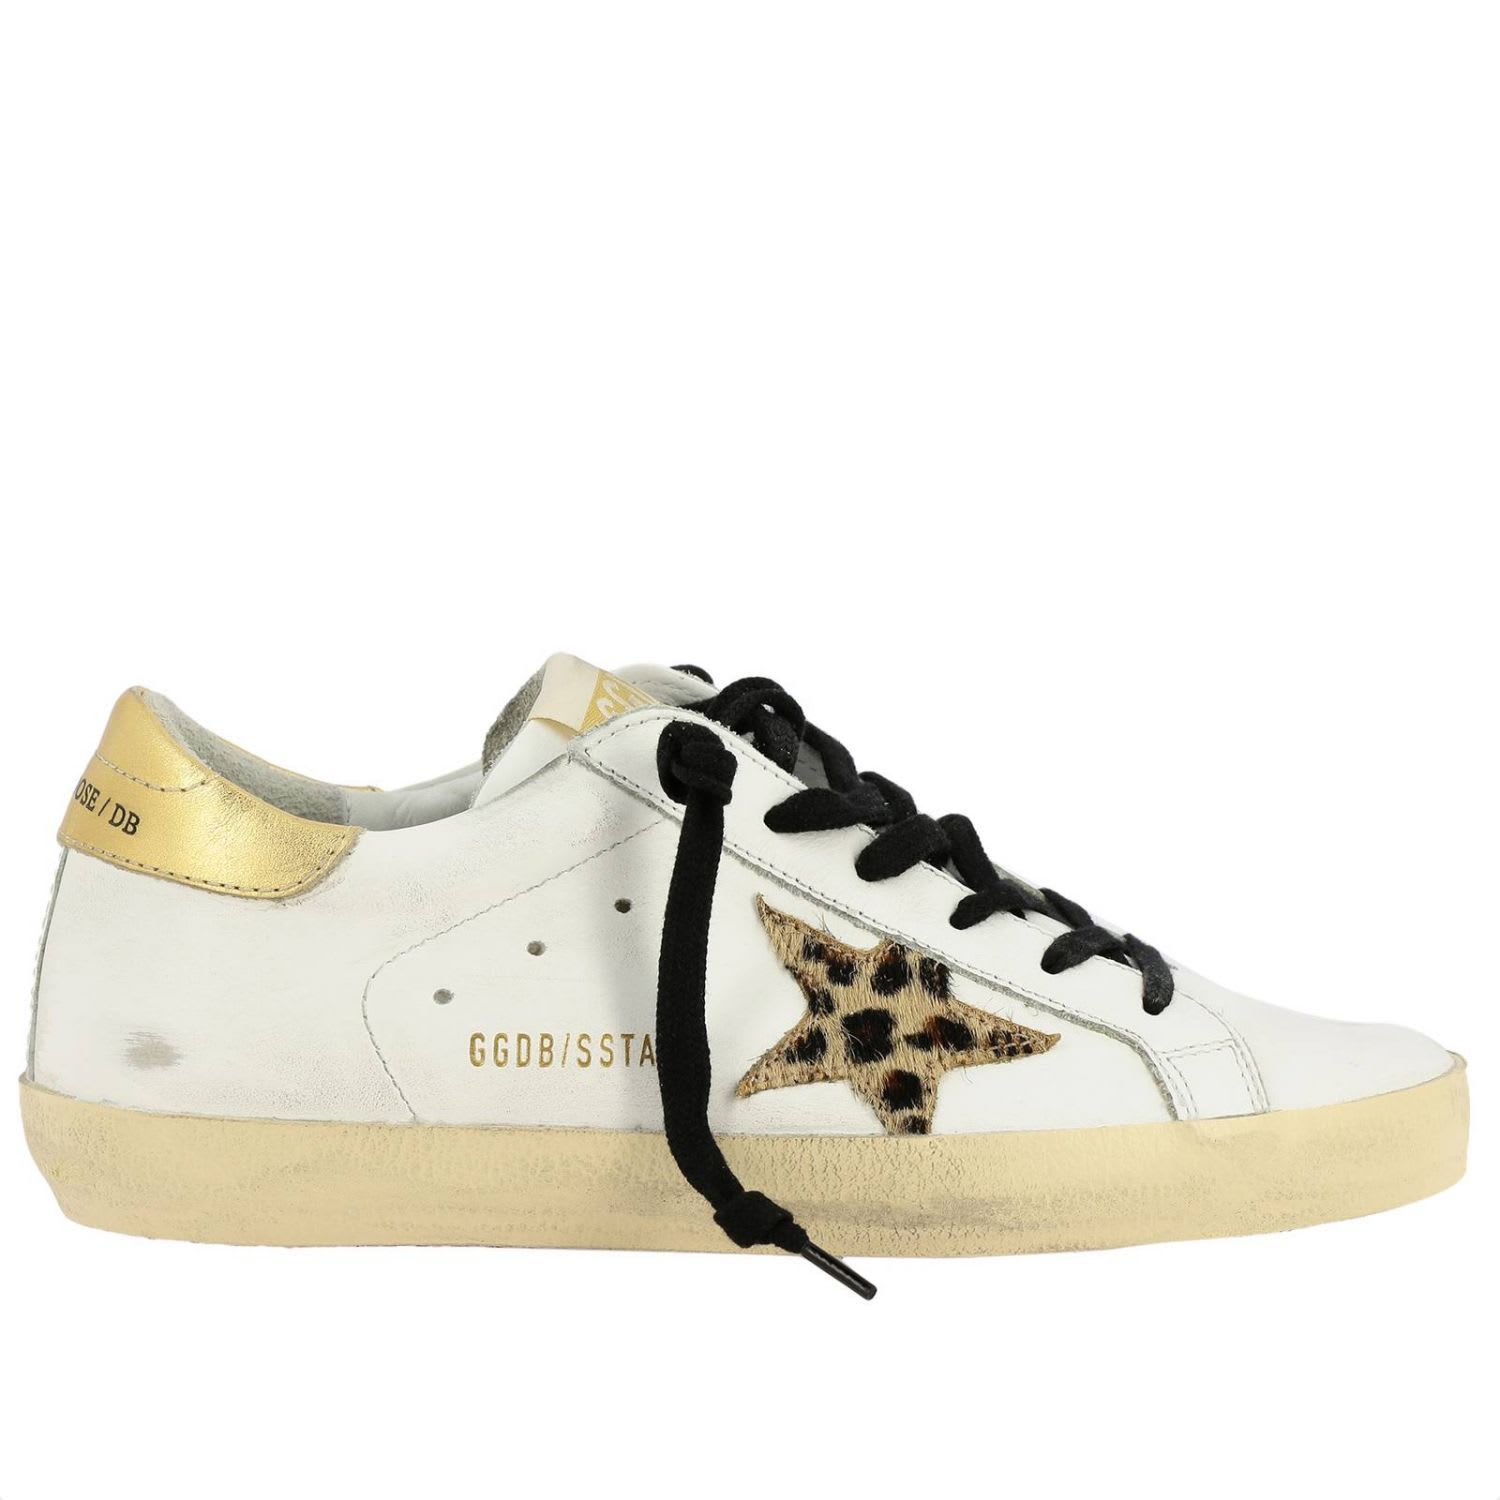 Golden Goose Sneakers Superstar Golden Goose Sneakers In Leather With Animalier Pony Star And Laminated Heel | Italist.com US